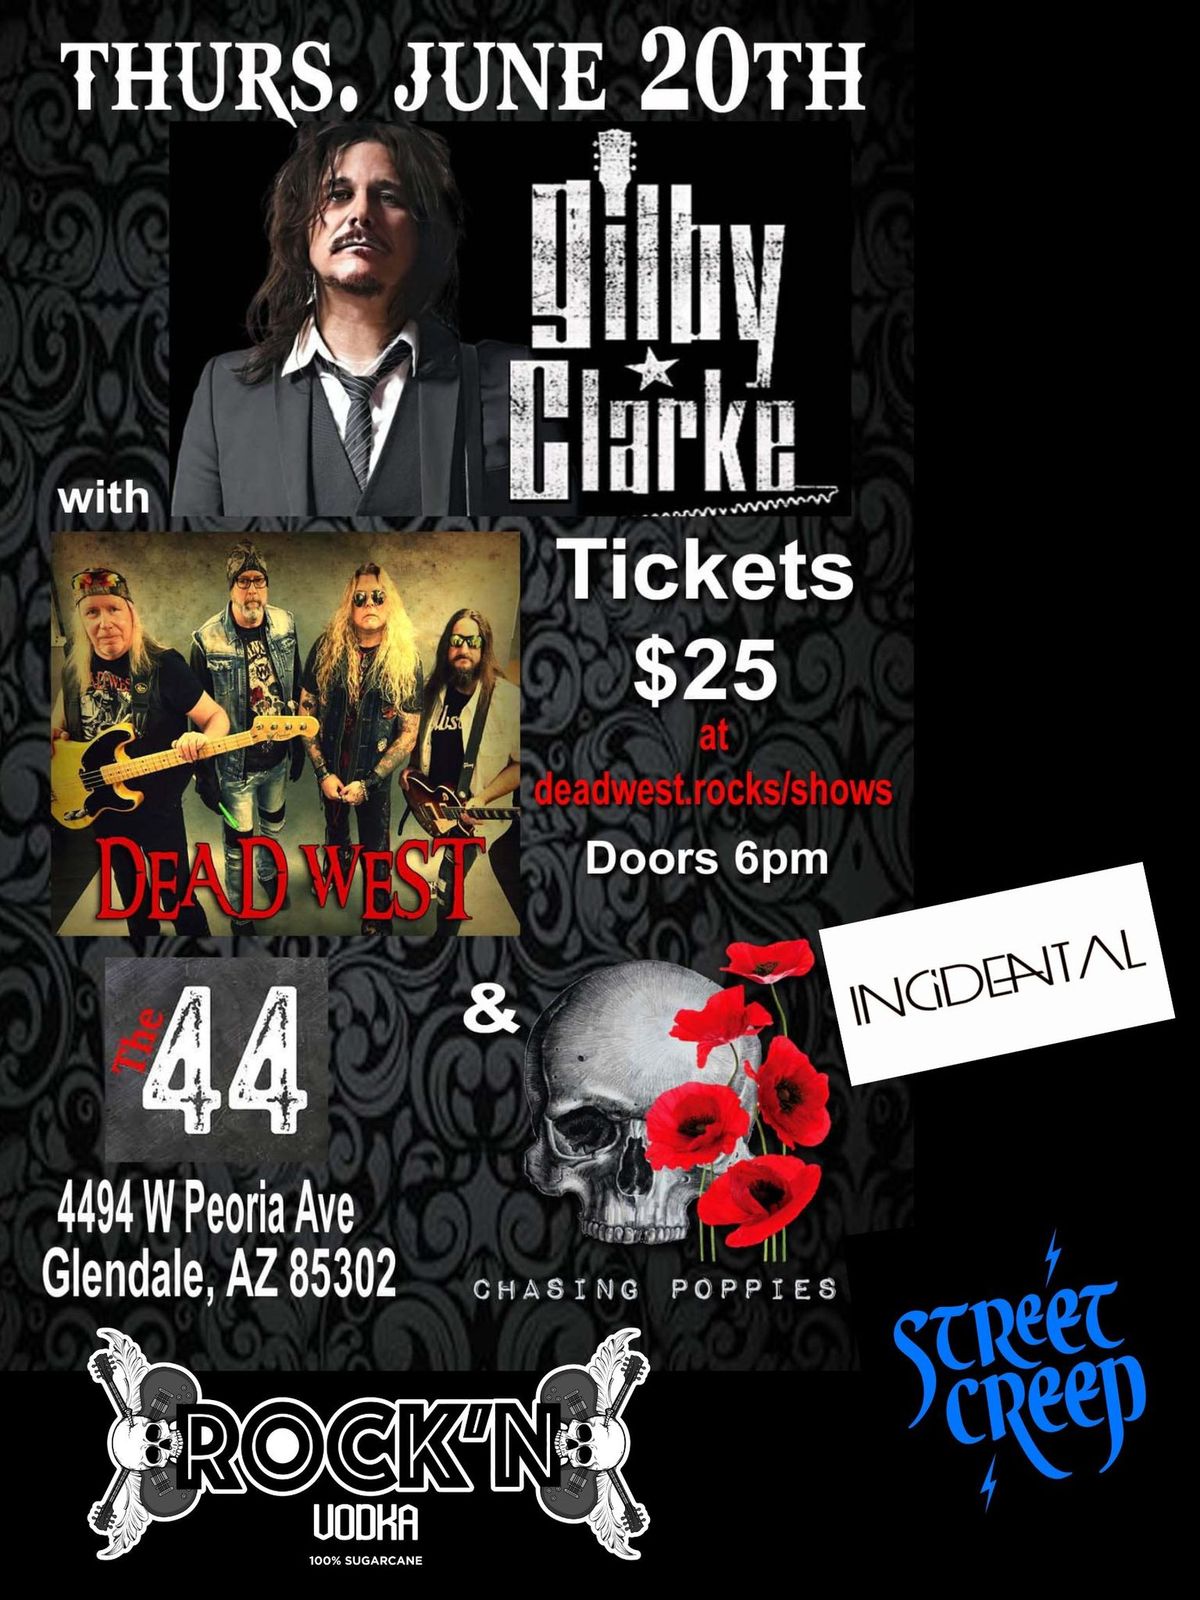 Gilby Clarke w\/ Dead West, Chasing Poppies, Incidental, & Street Creep